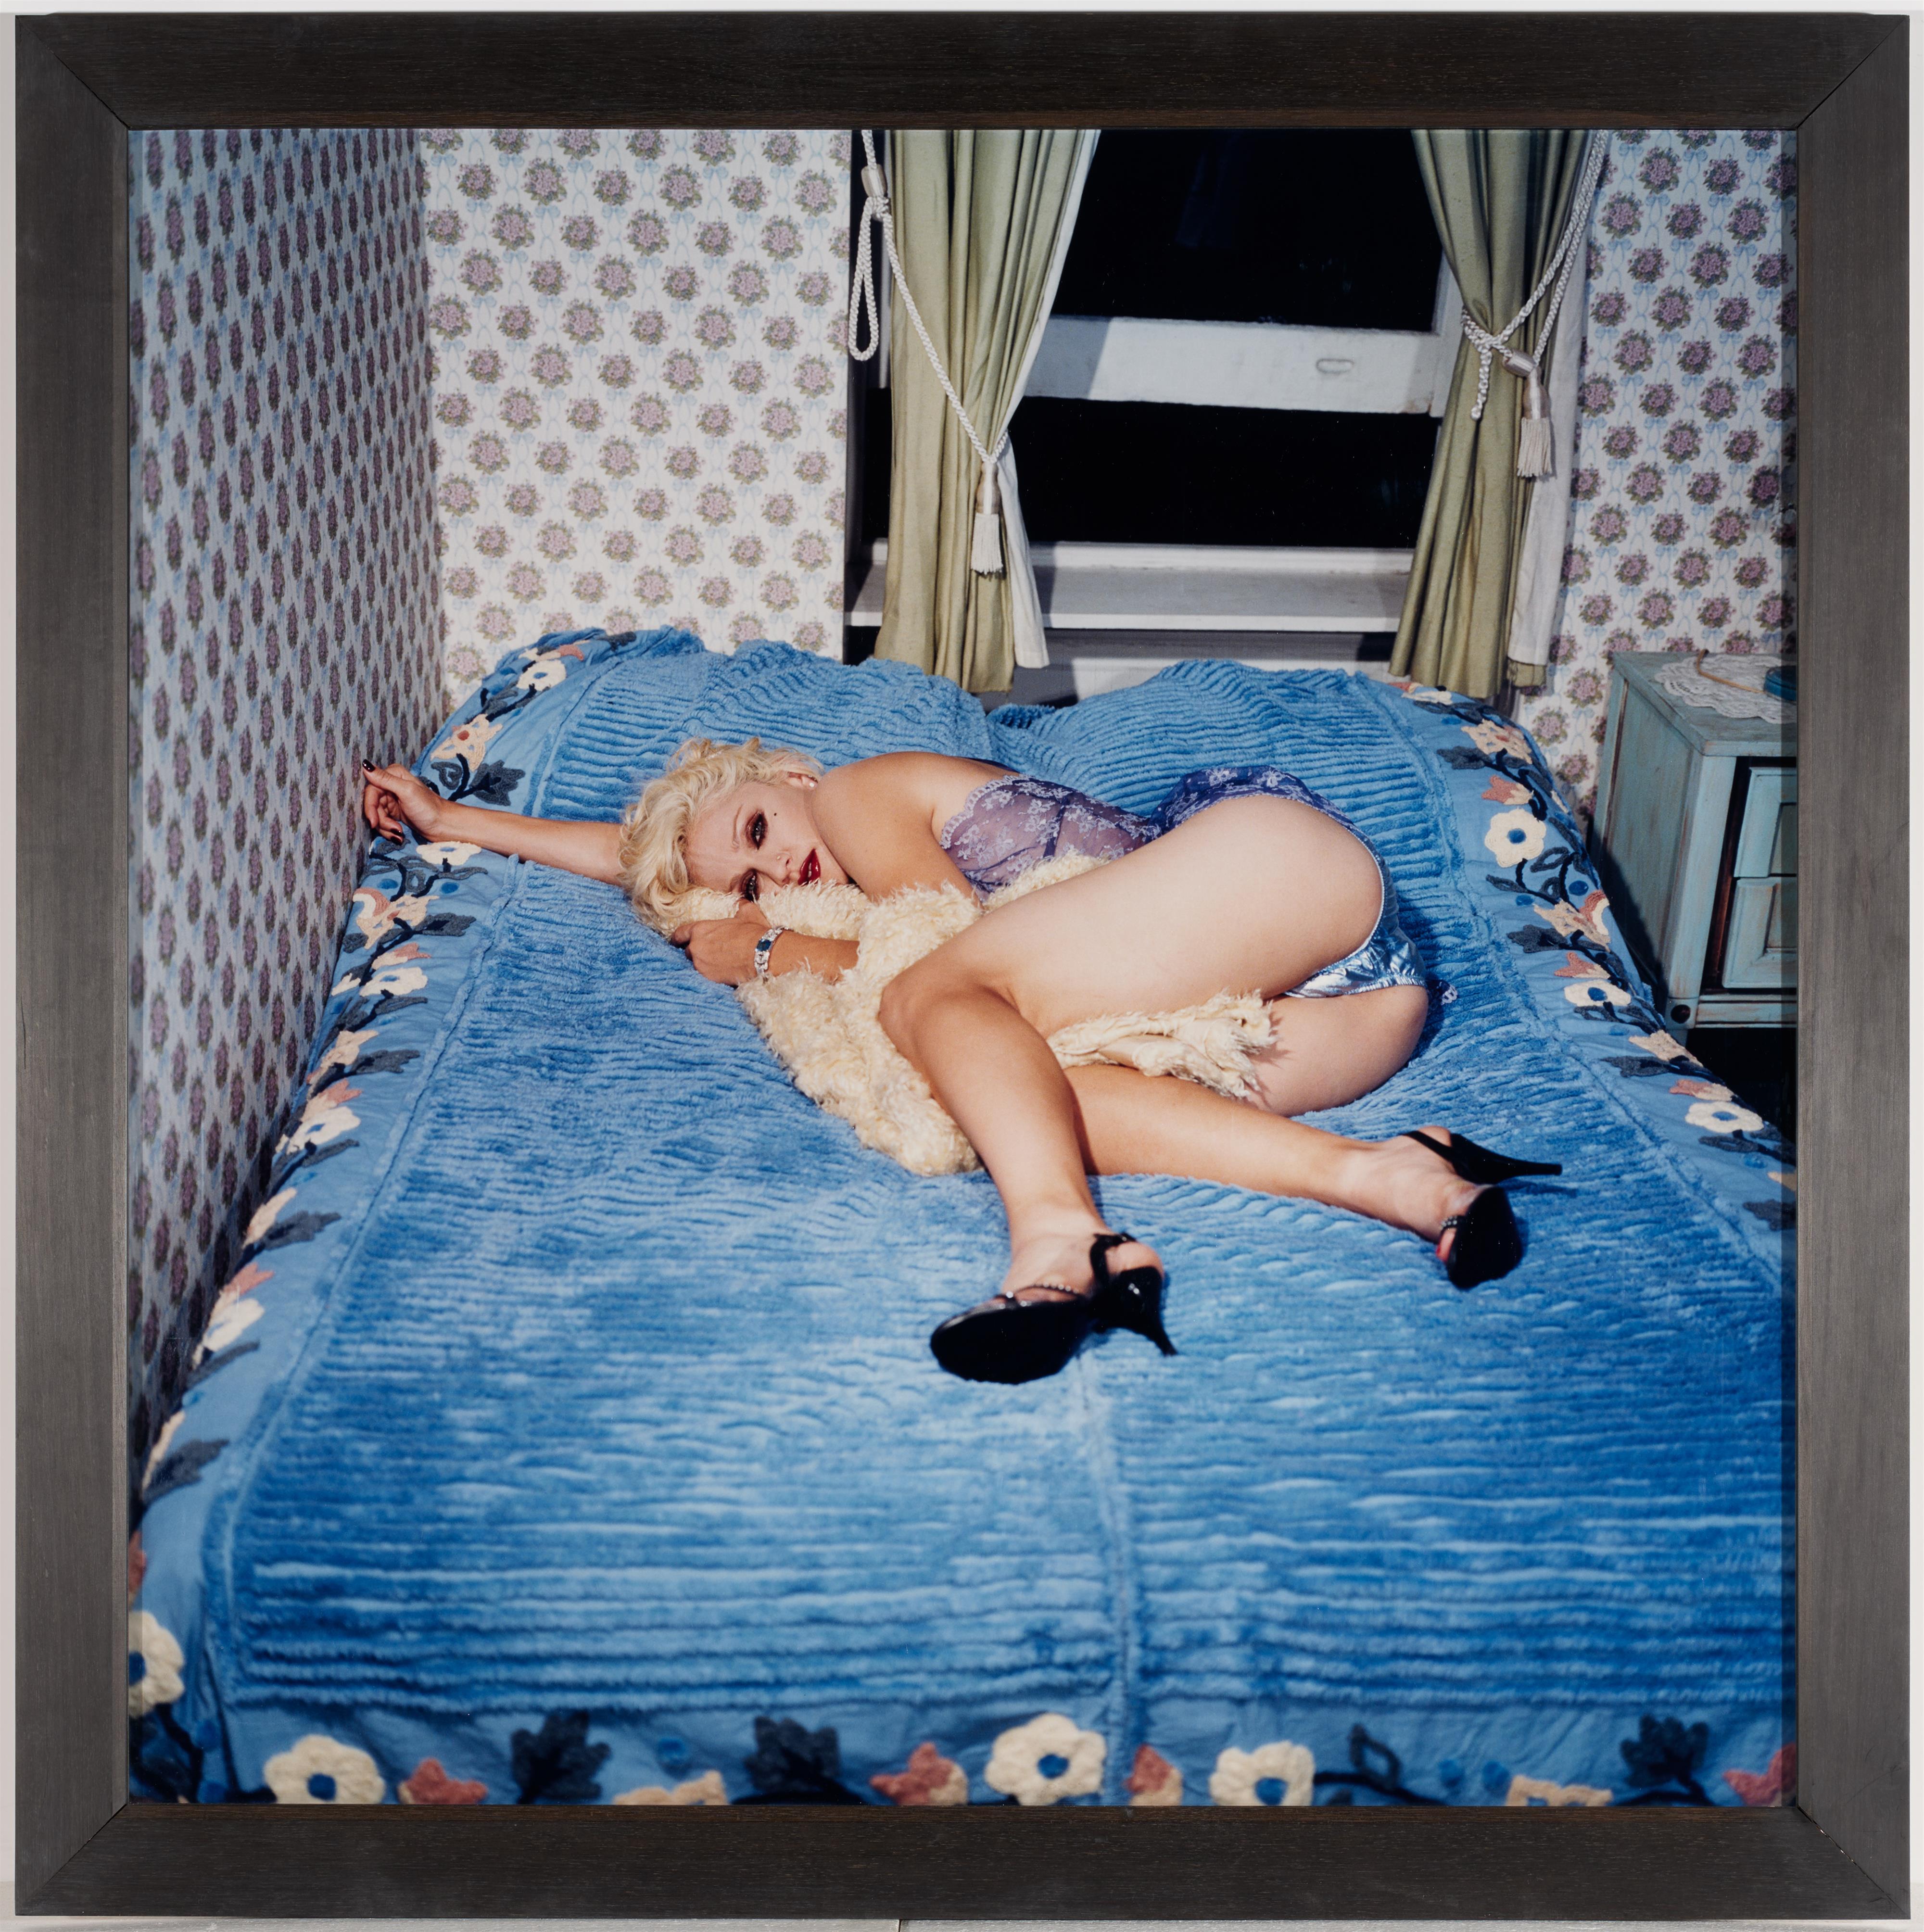 Bettina Rheims - Madonna Blue in Shiny Blue Underpants, New York (from the series: Pourquoi m'as-tu abandonnée?) - image-2